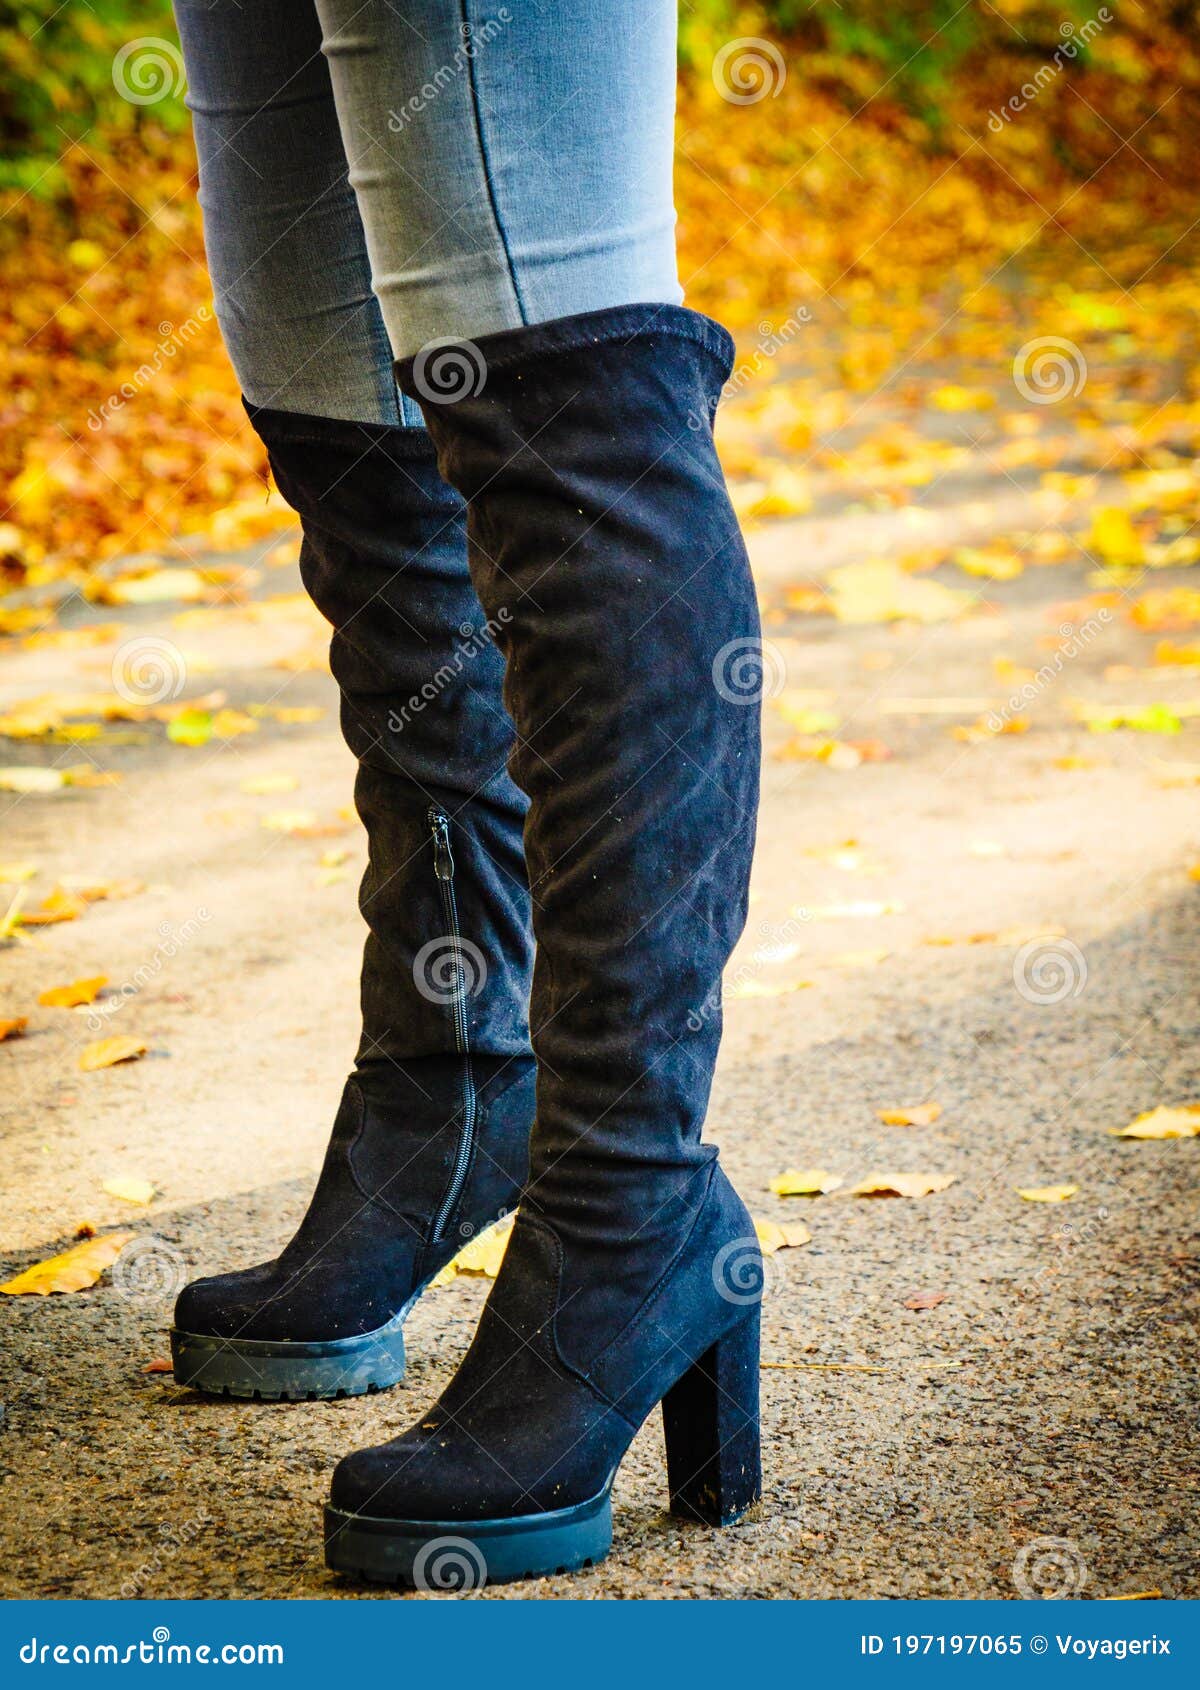 Woman Wearing Black Knee High Boots Stock Image - Image of beautiful ...